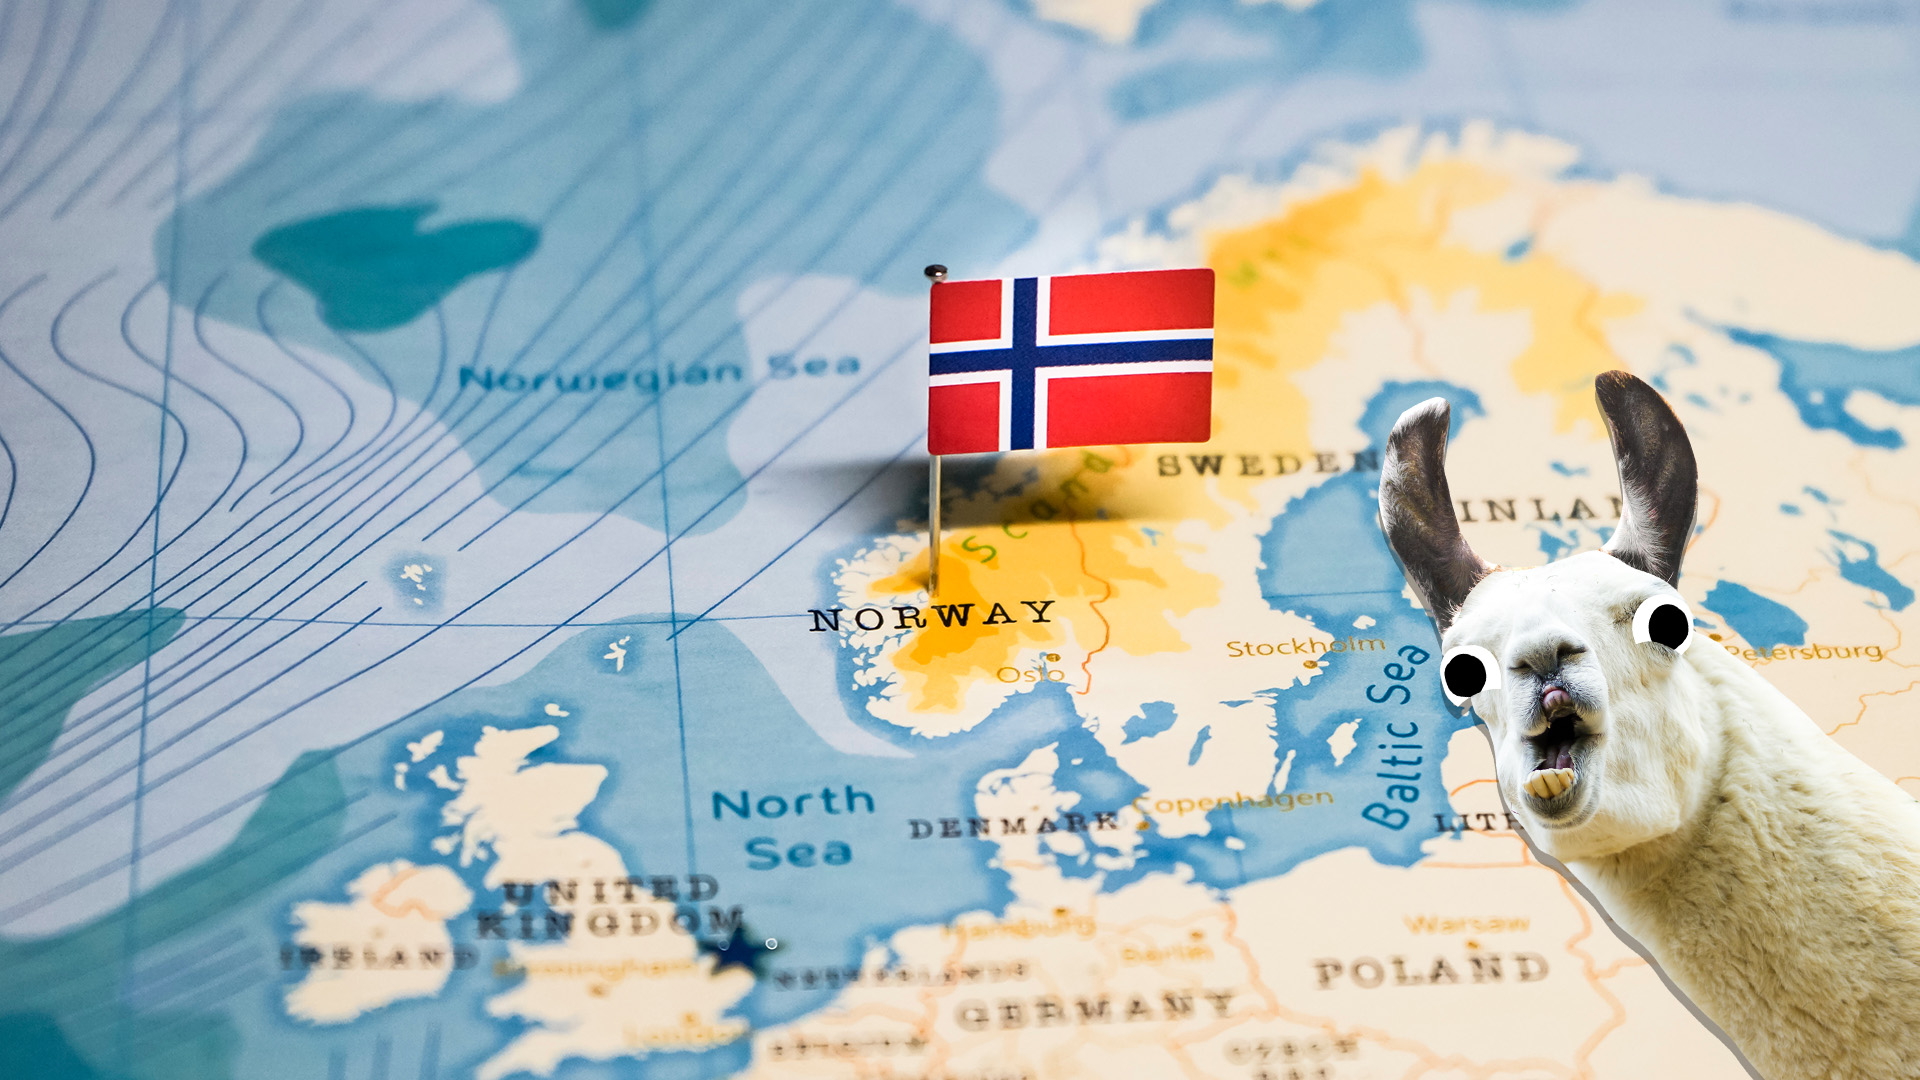 A map with a flag of Norway pinned onto the country. There's a llama too and they look surprised